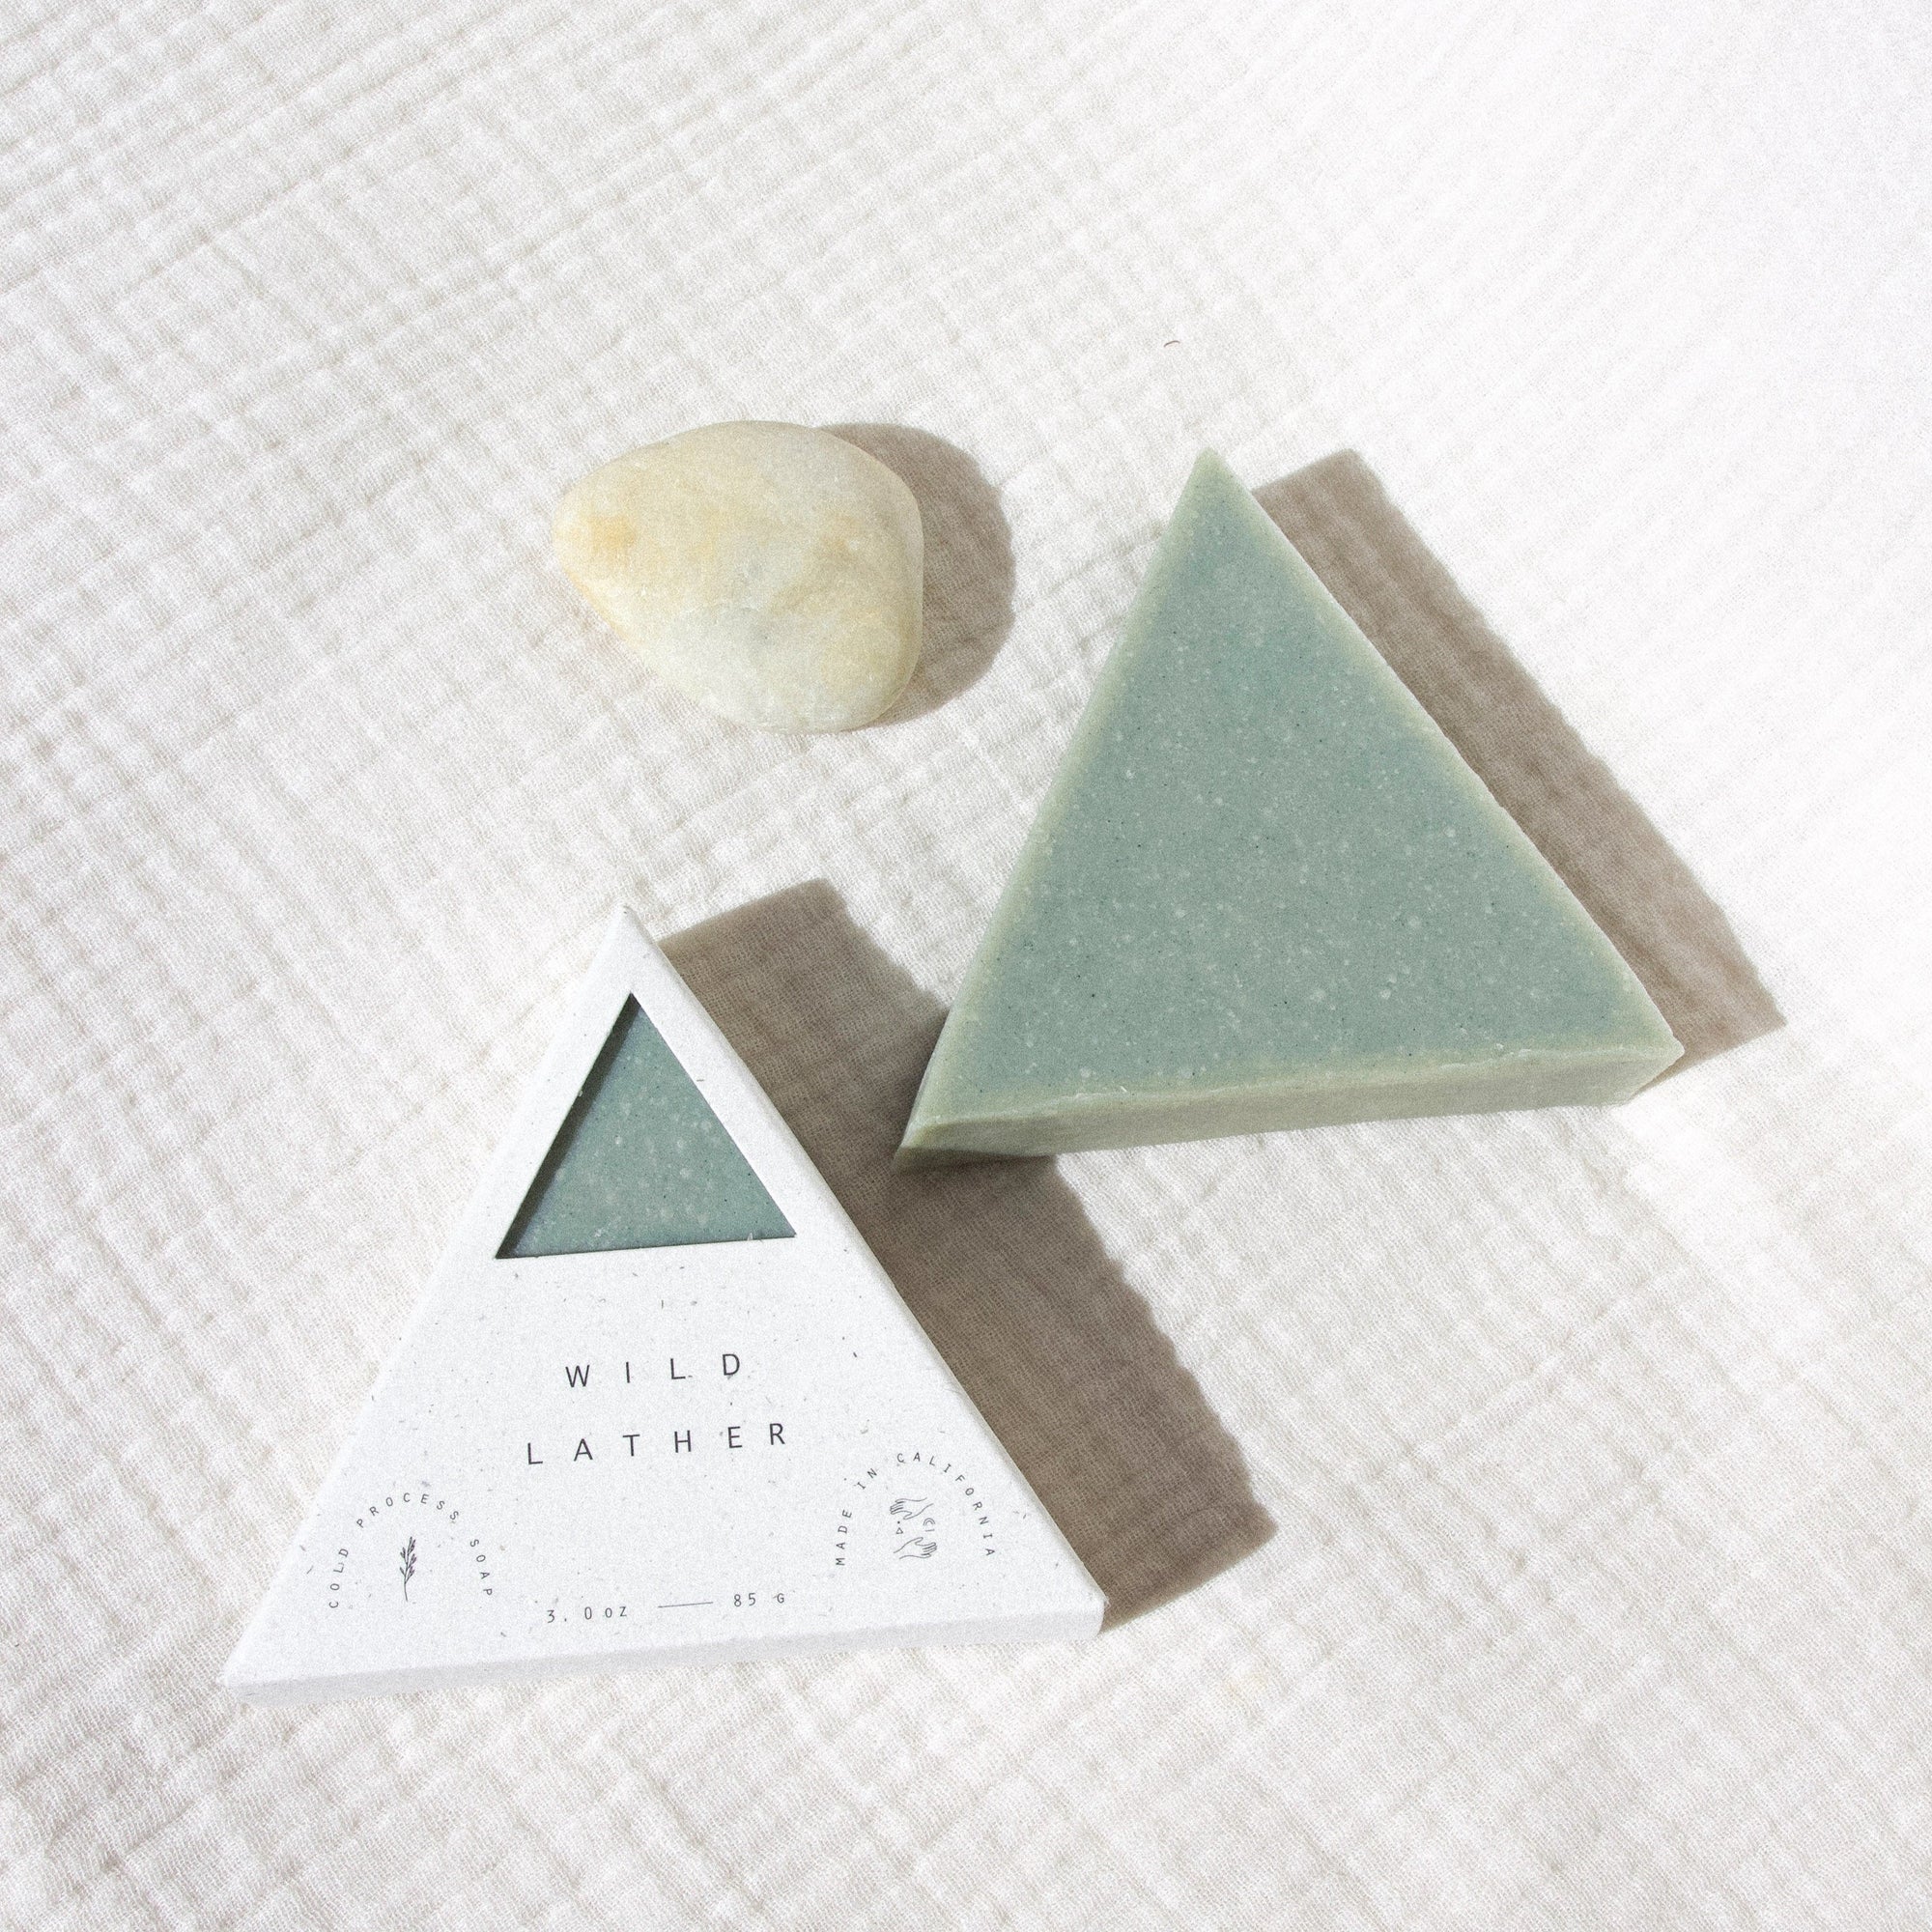 Indigo blue triangle soap packaged in a speckled white box